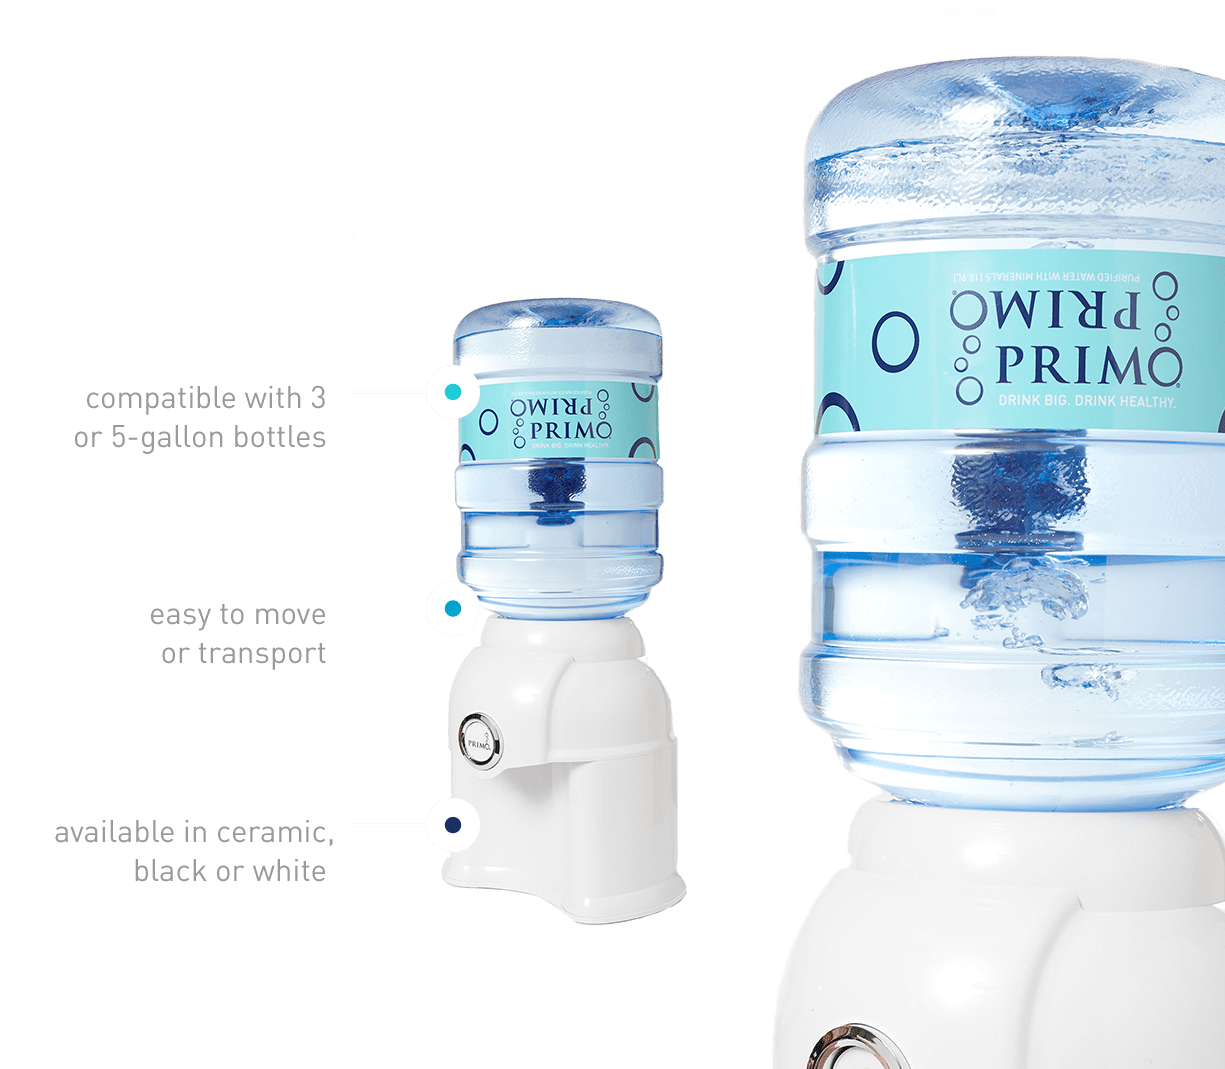 Countertop Water Jug, Bulk Water Bottle Dispensers: Compatible with 3 or 5-gallon bottles. Easy to move or transport. Available in ceramic, black or white.